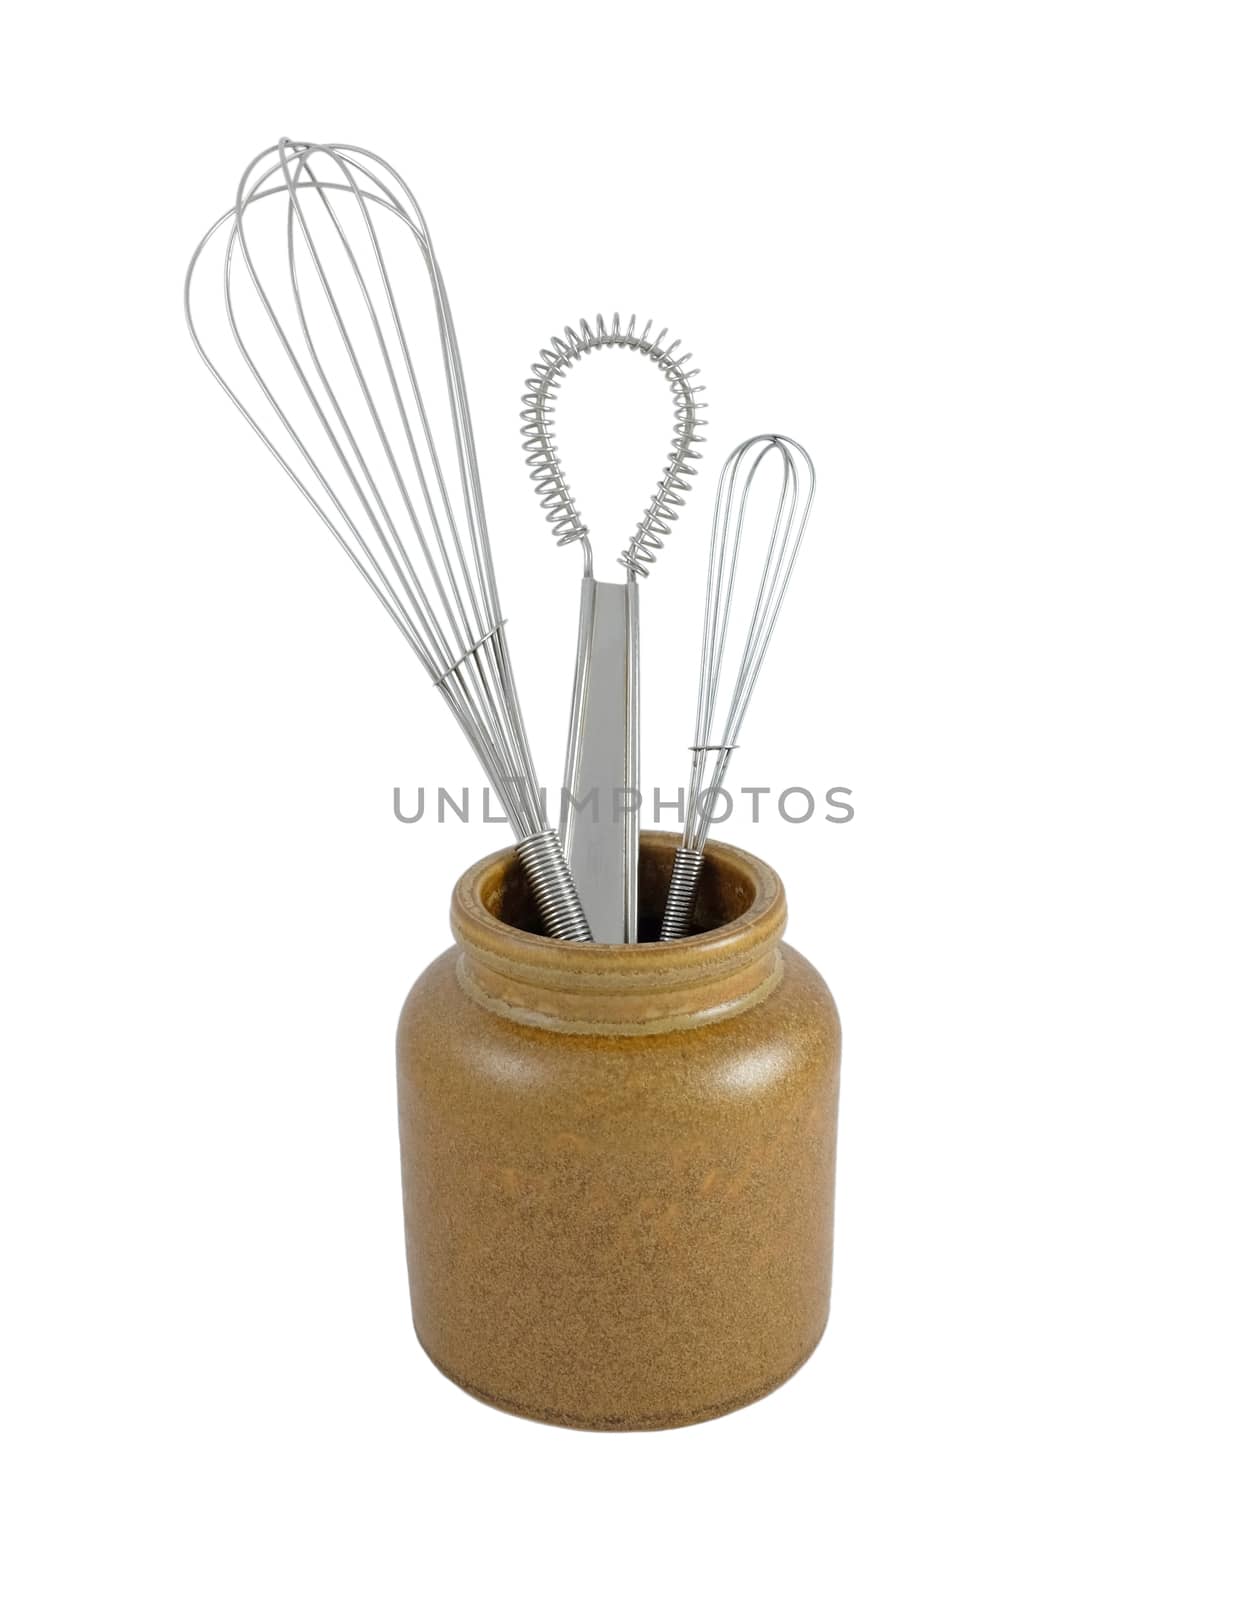 Three metal whisks in a brown ceramic jar, isolated on a white background 